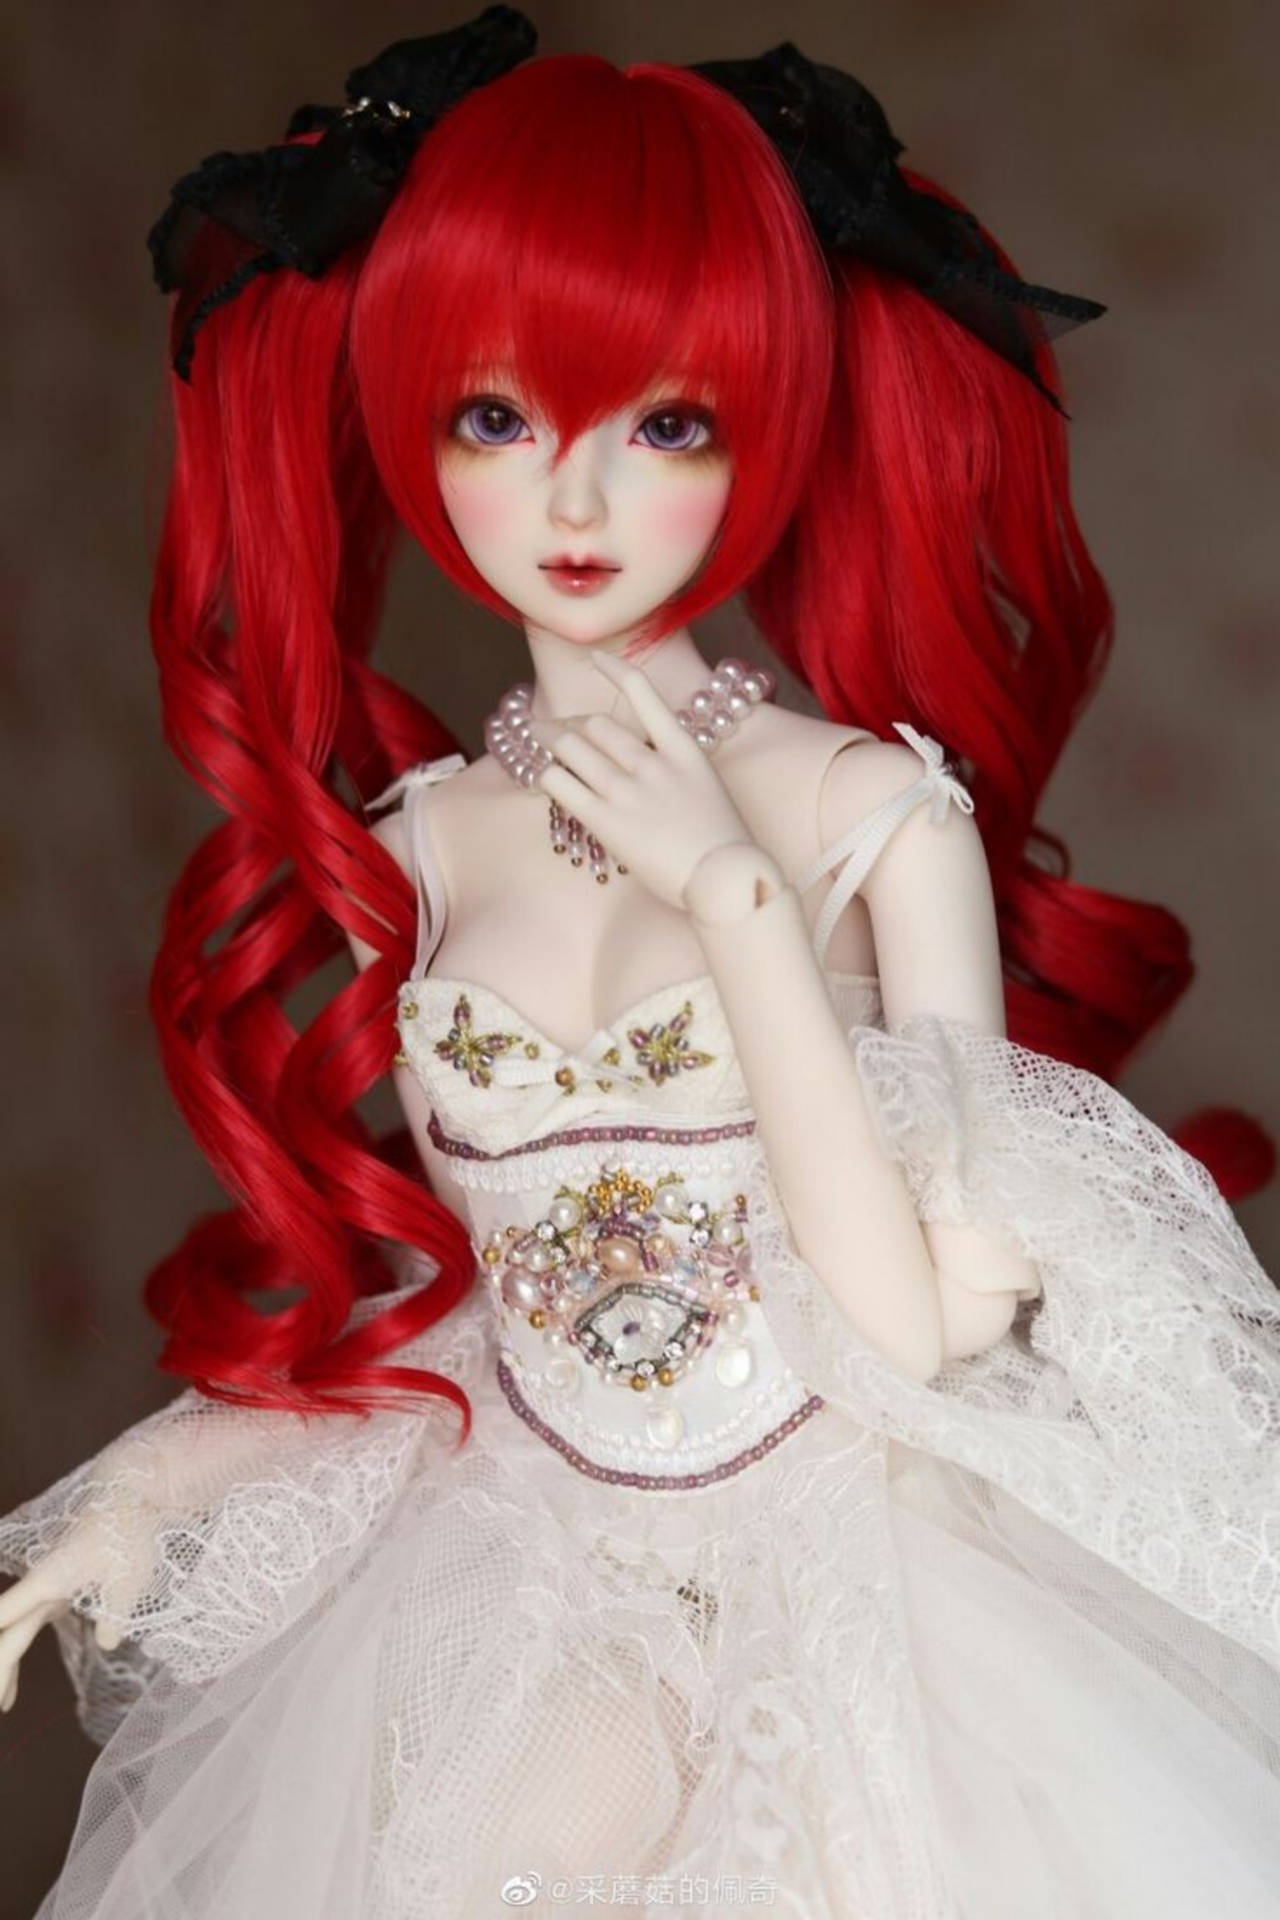 Barbie Doll With Red Hair In High Pigtails